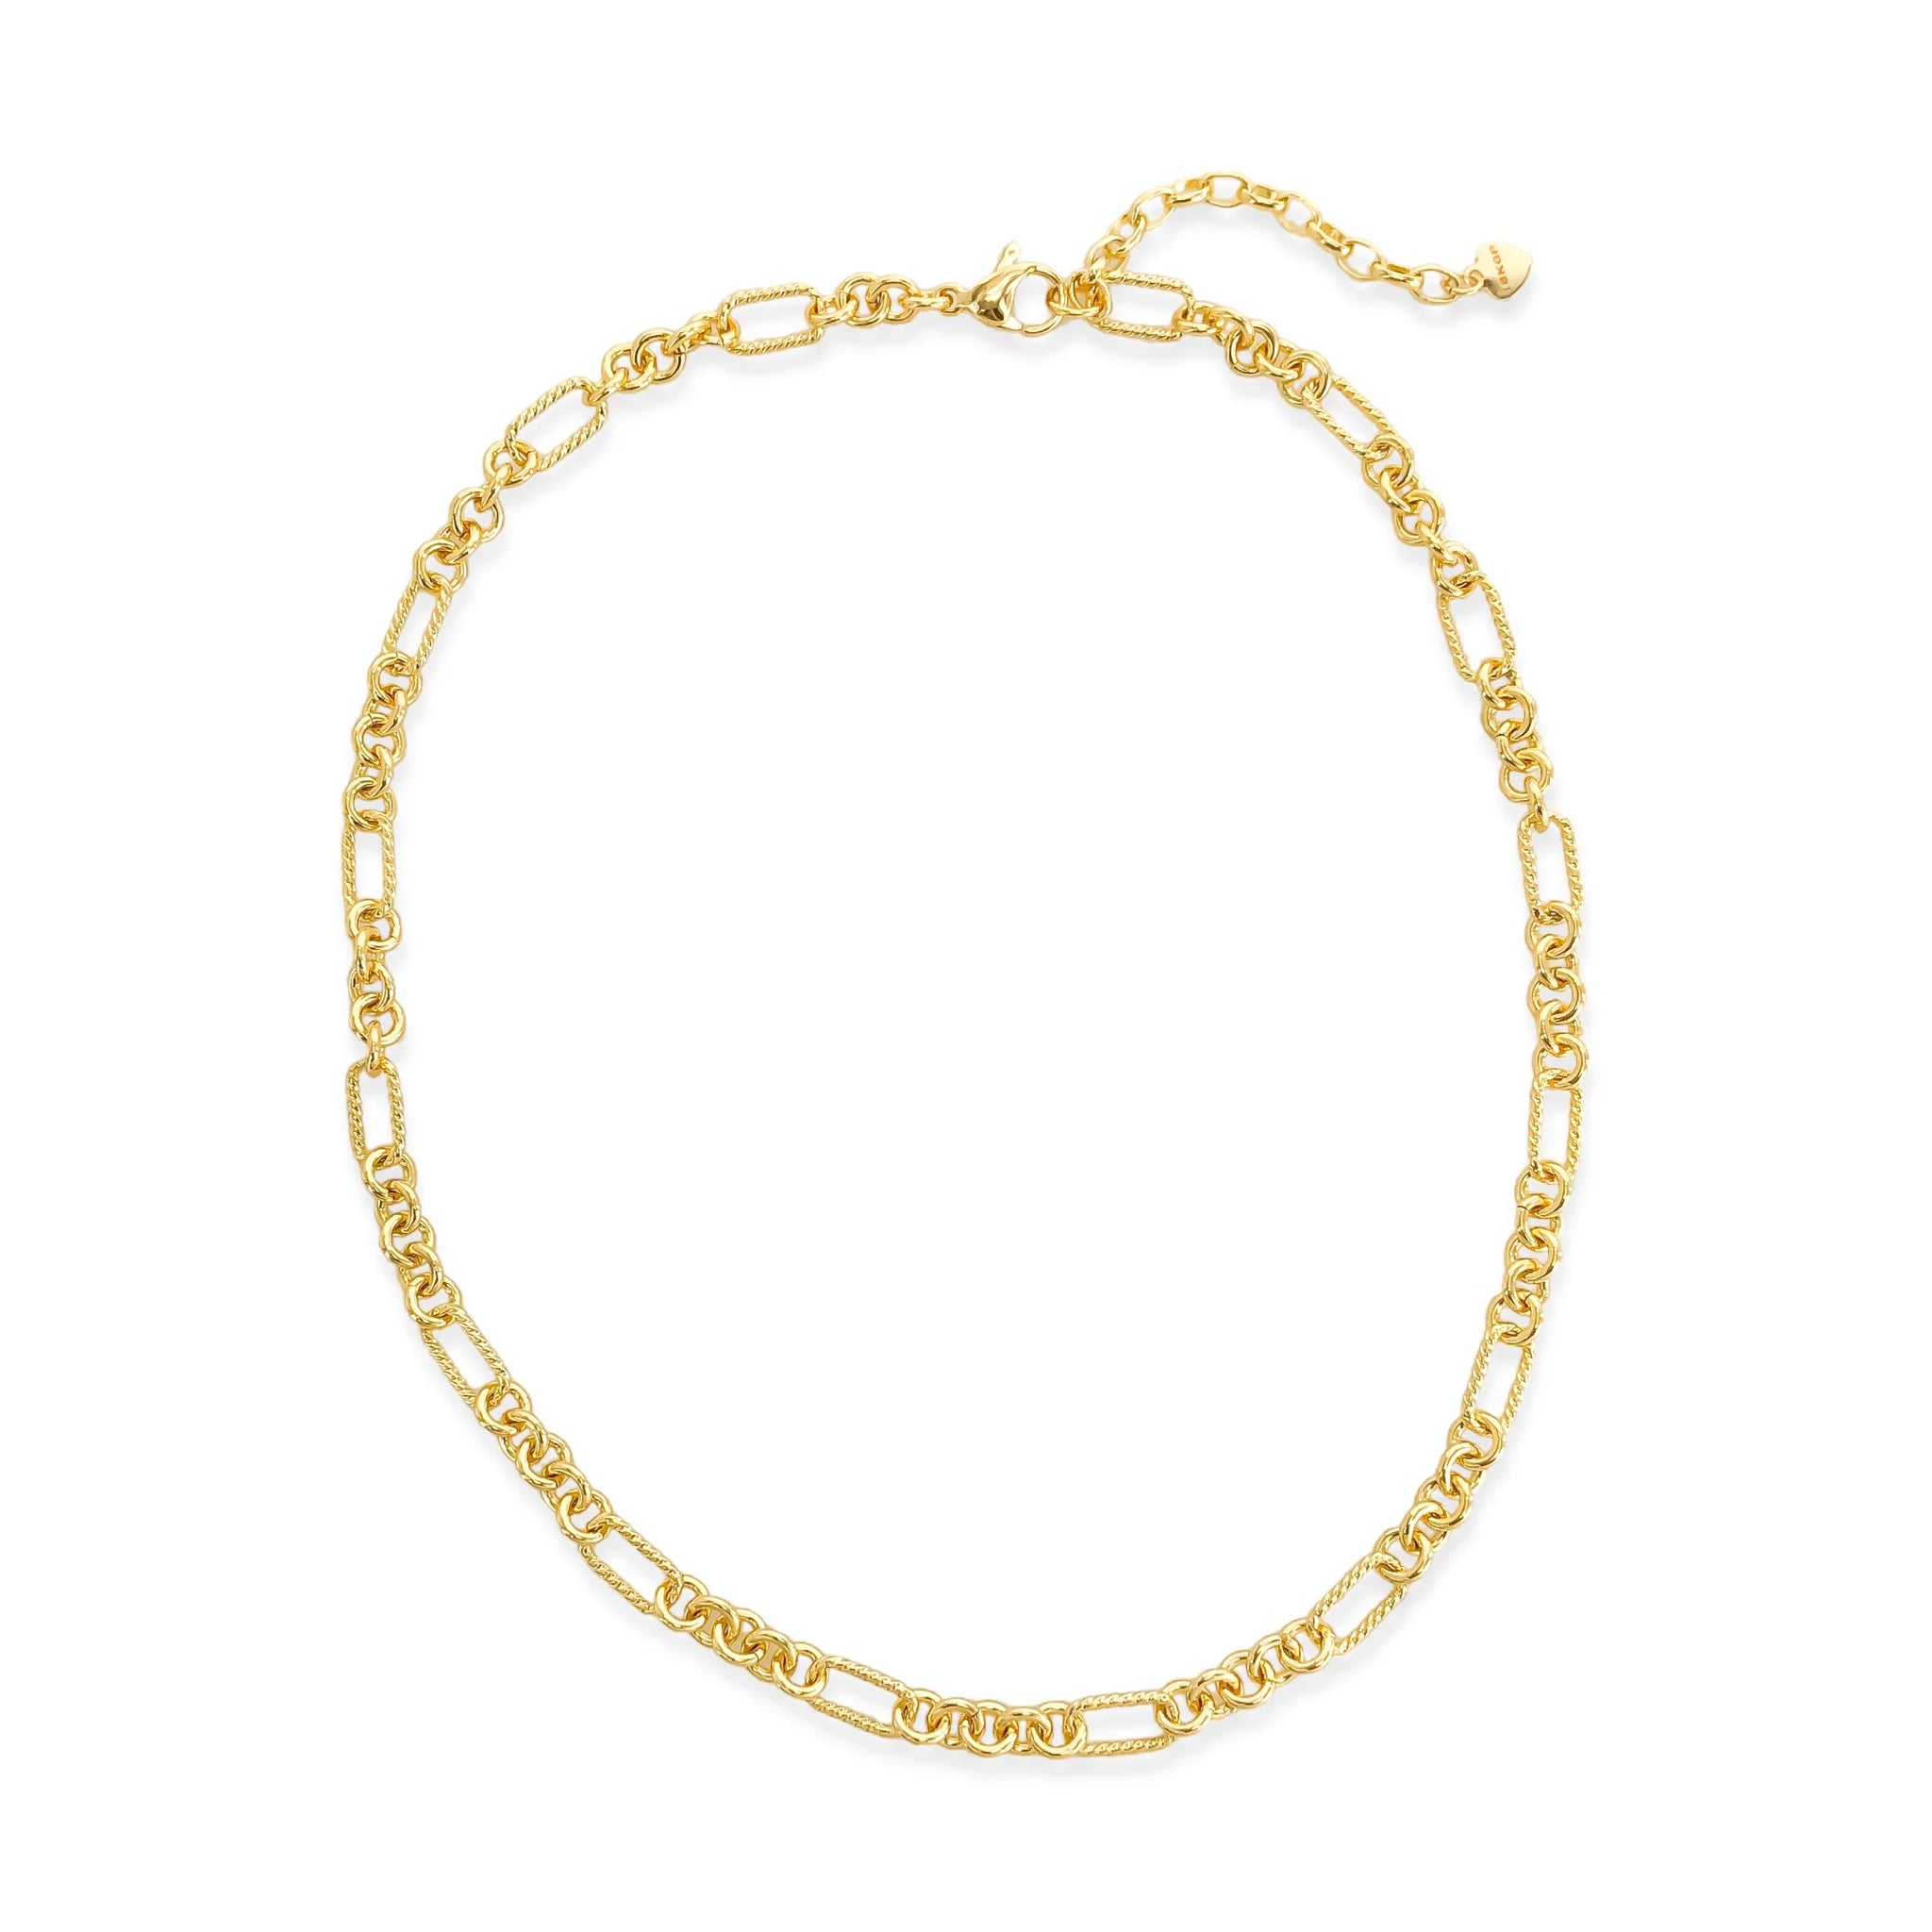 ANK499 - Textured Chain Necklace